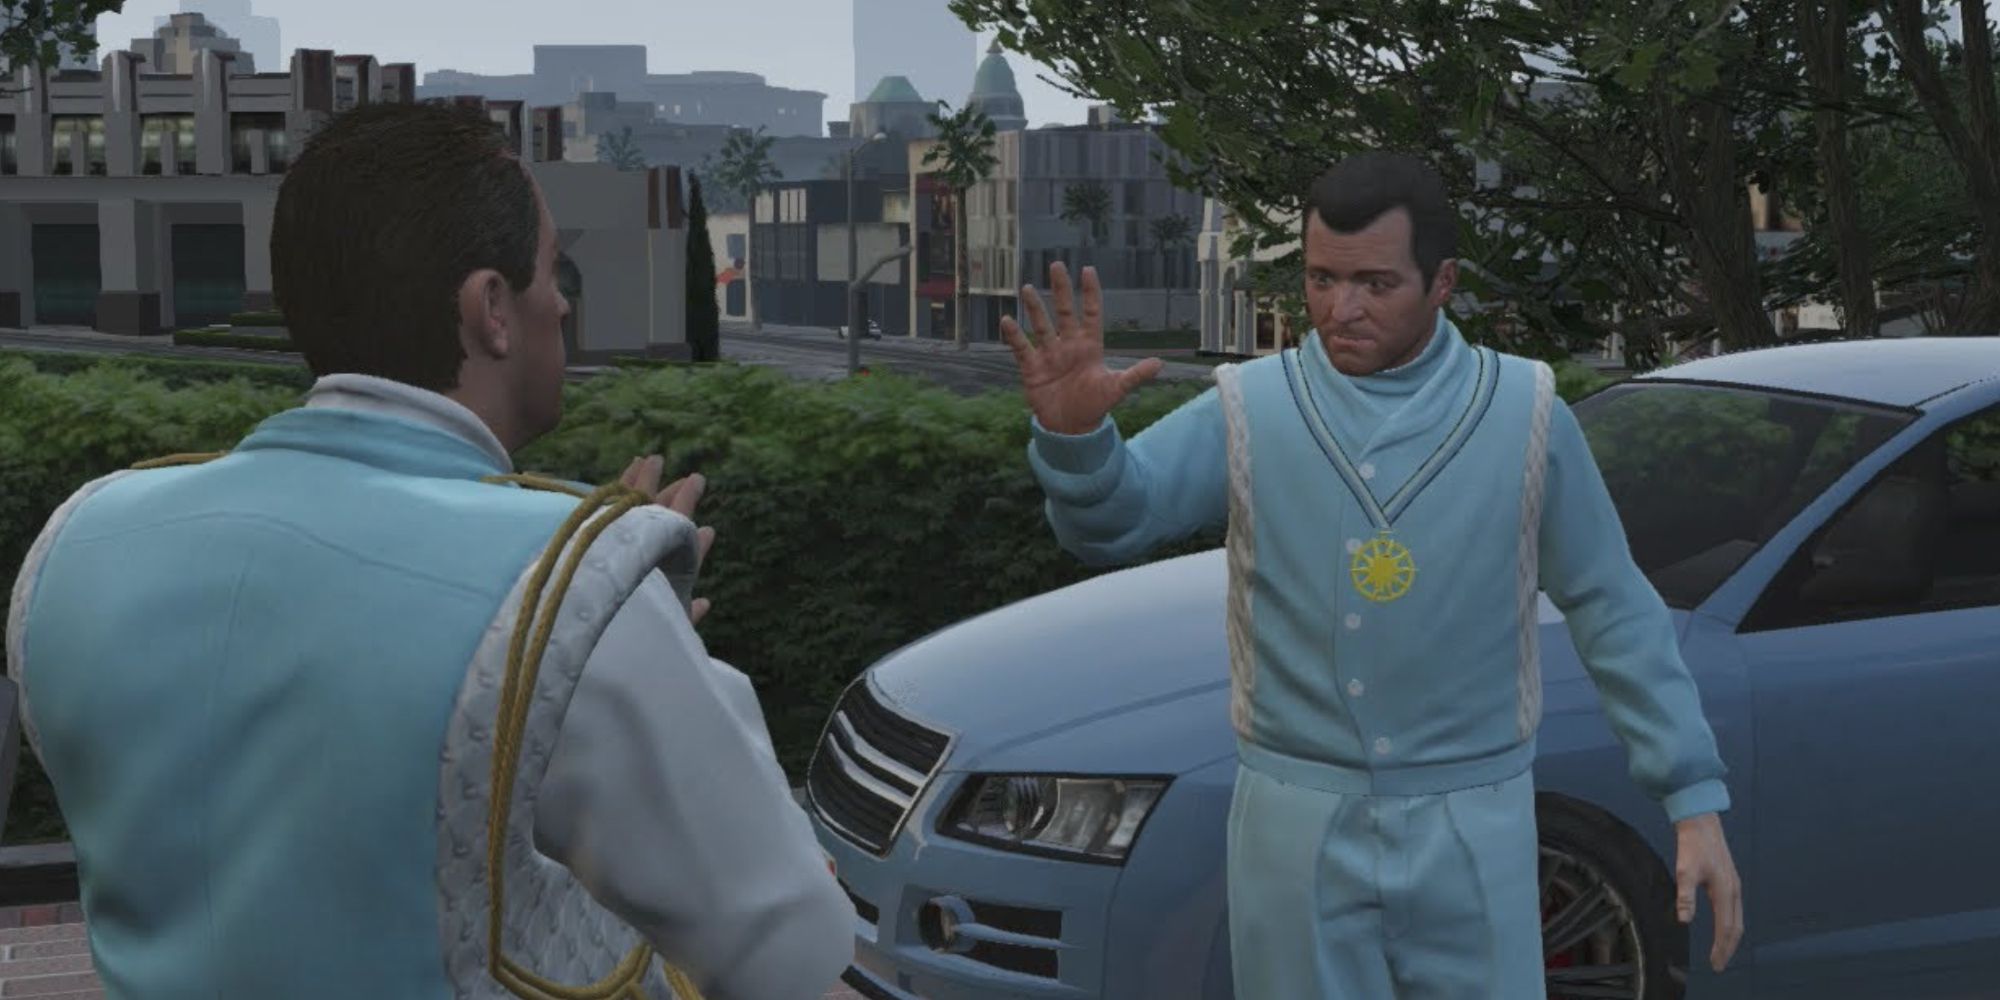 Michael interacting with someone from the Epsilon Program cult wearing cult uniform in GTA 5